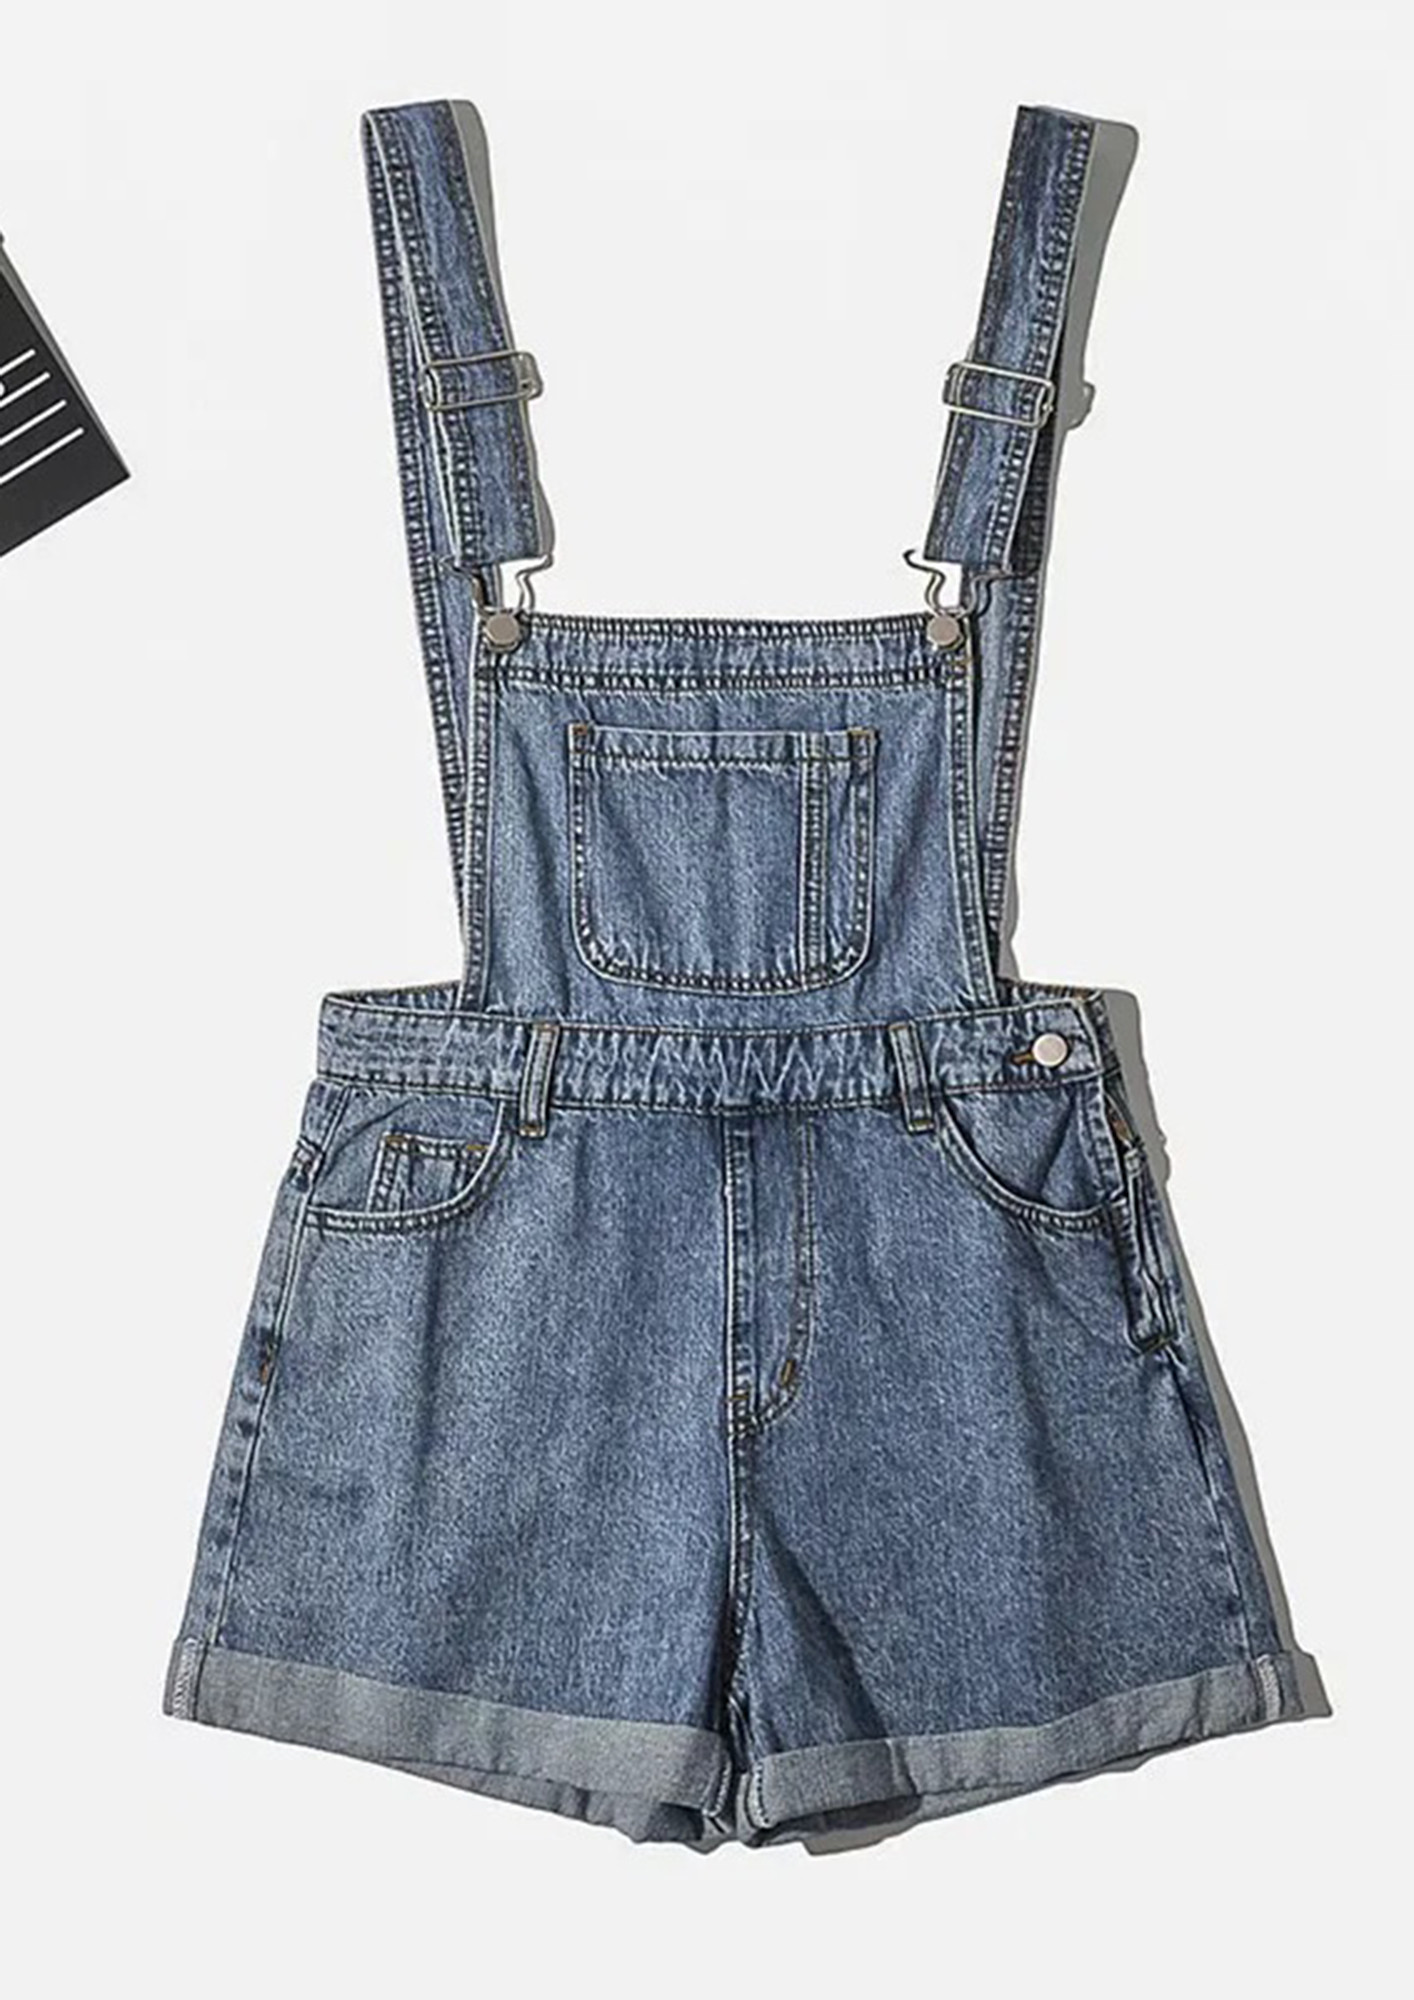 Womens Fashion Slim Jeans Jumpsuit Denim Overall Hot Shorts Suspenders  Dungarees | eBay